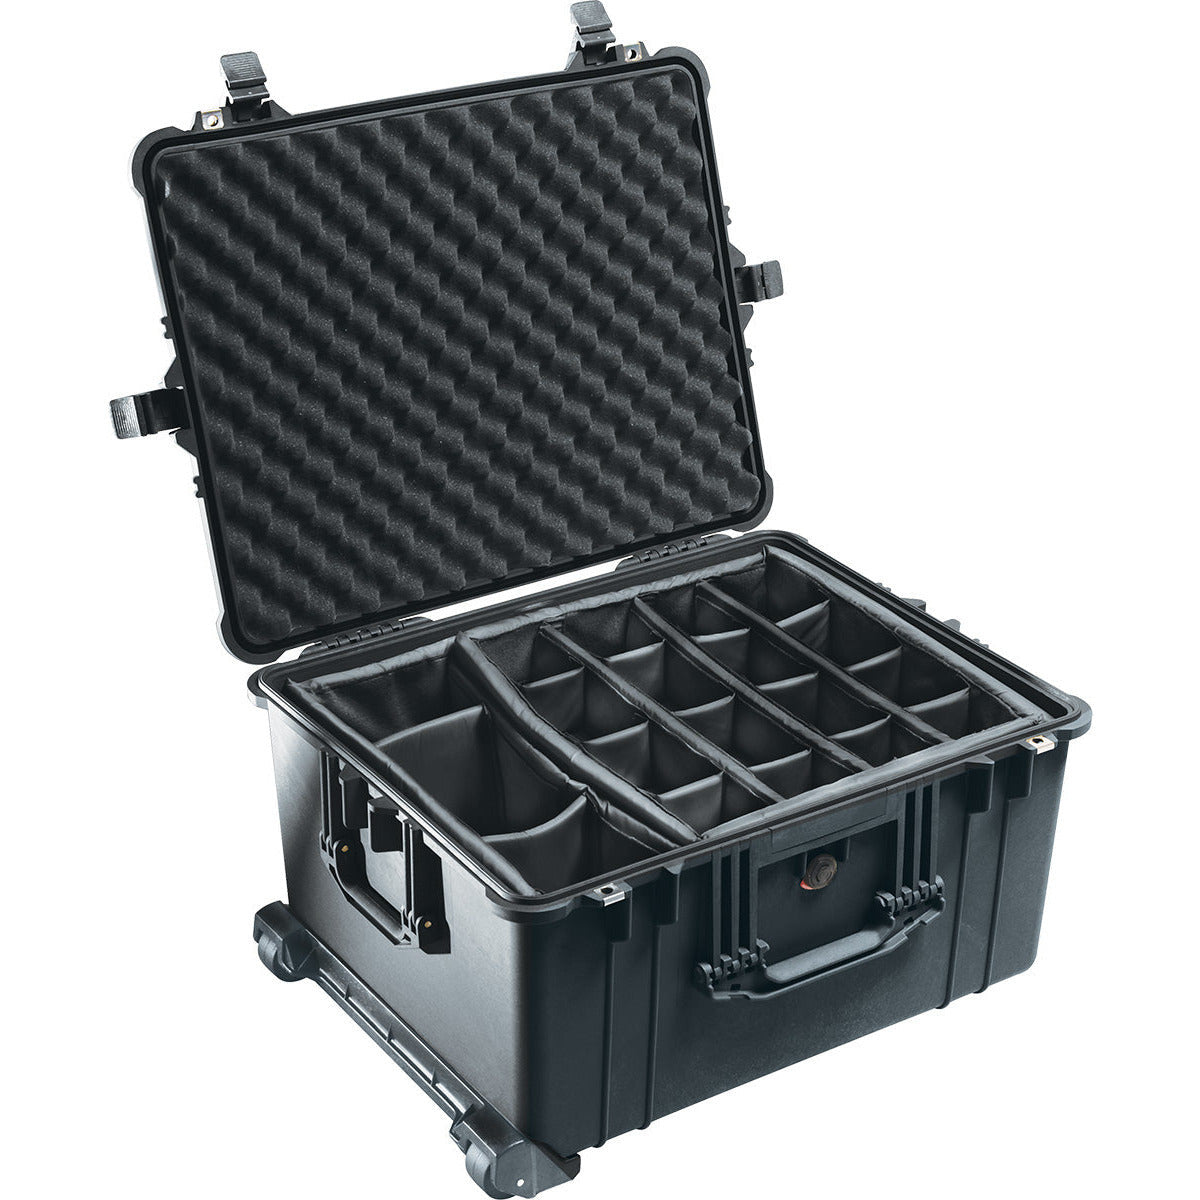 Pelican 1620 Hard Case Black with Padded Dividers - Dragon Image